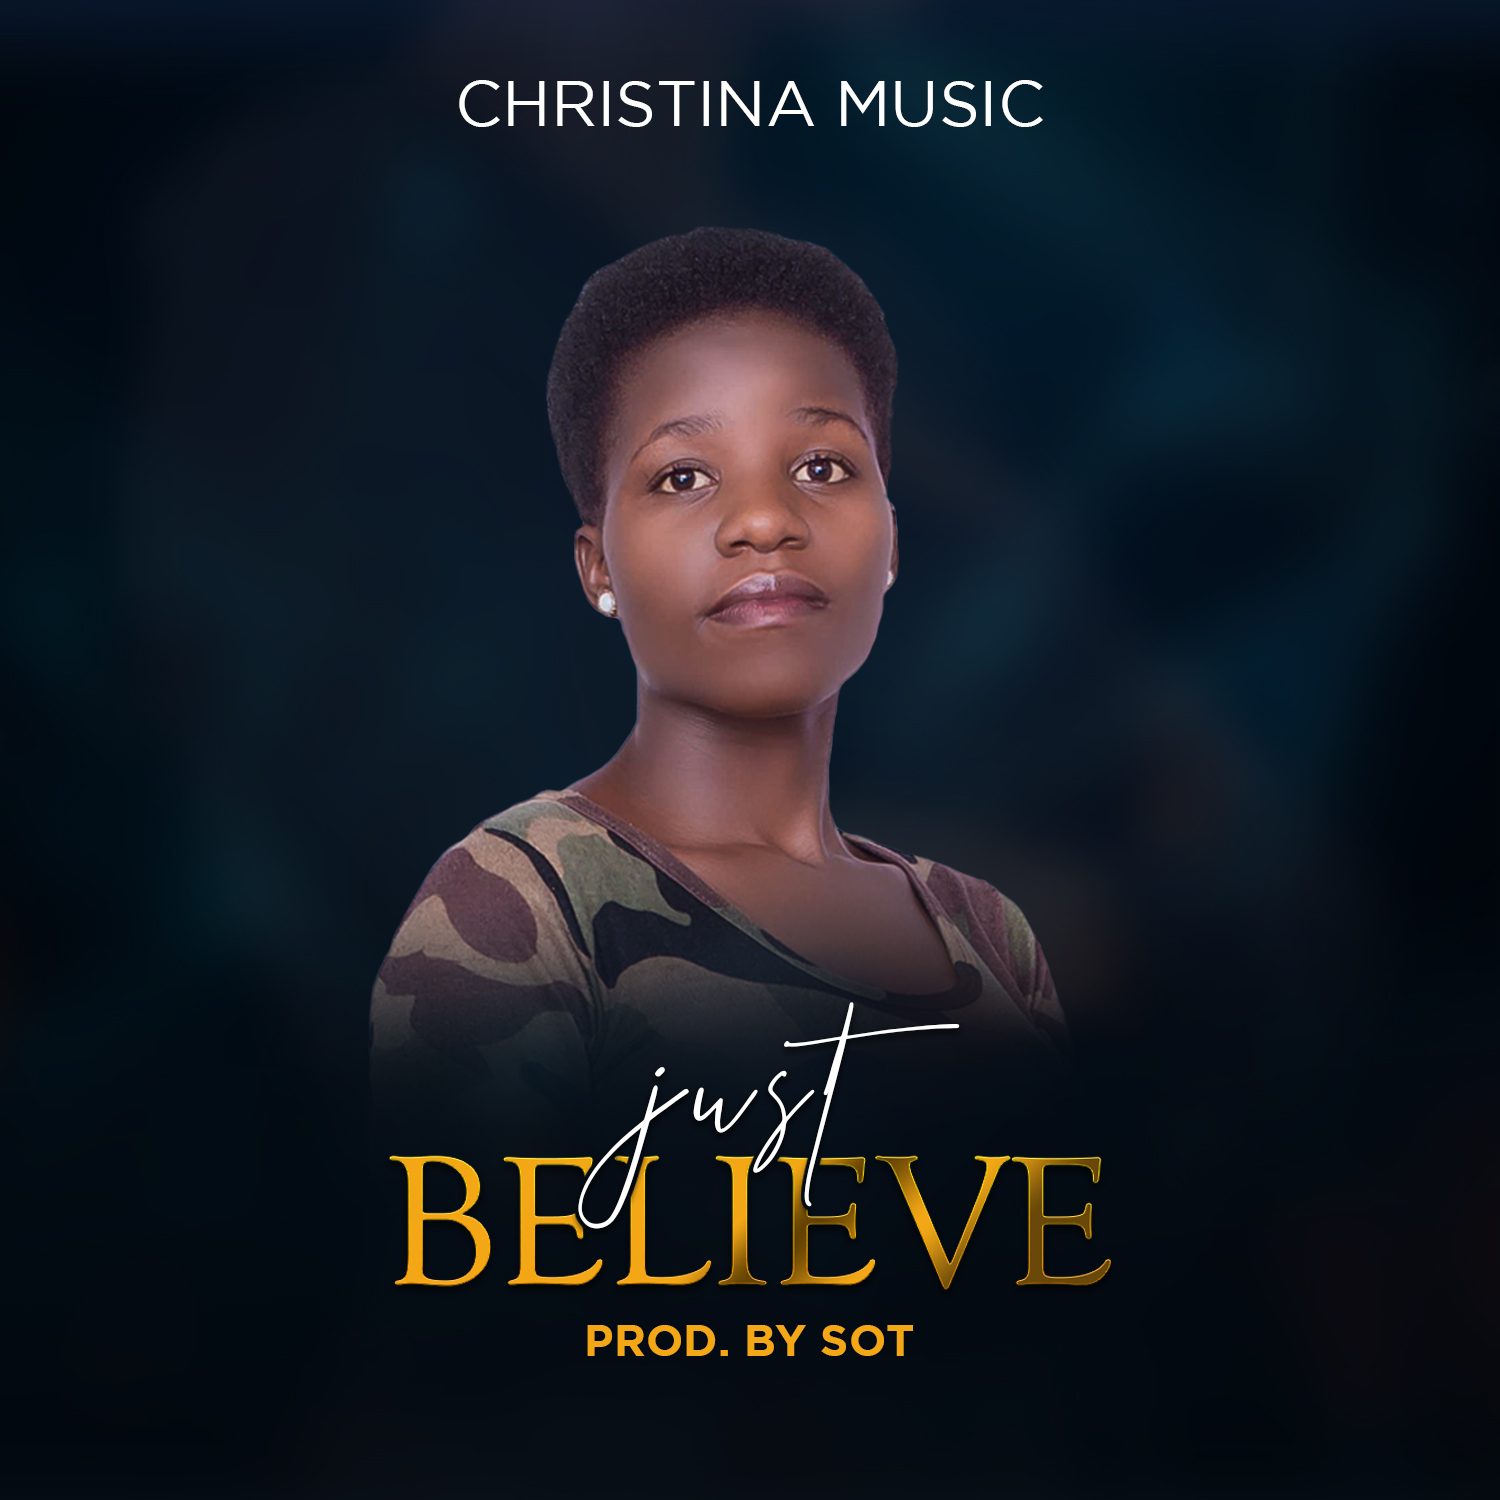  [Music Download] Christina Music – Just Believe